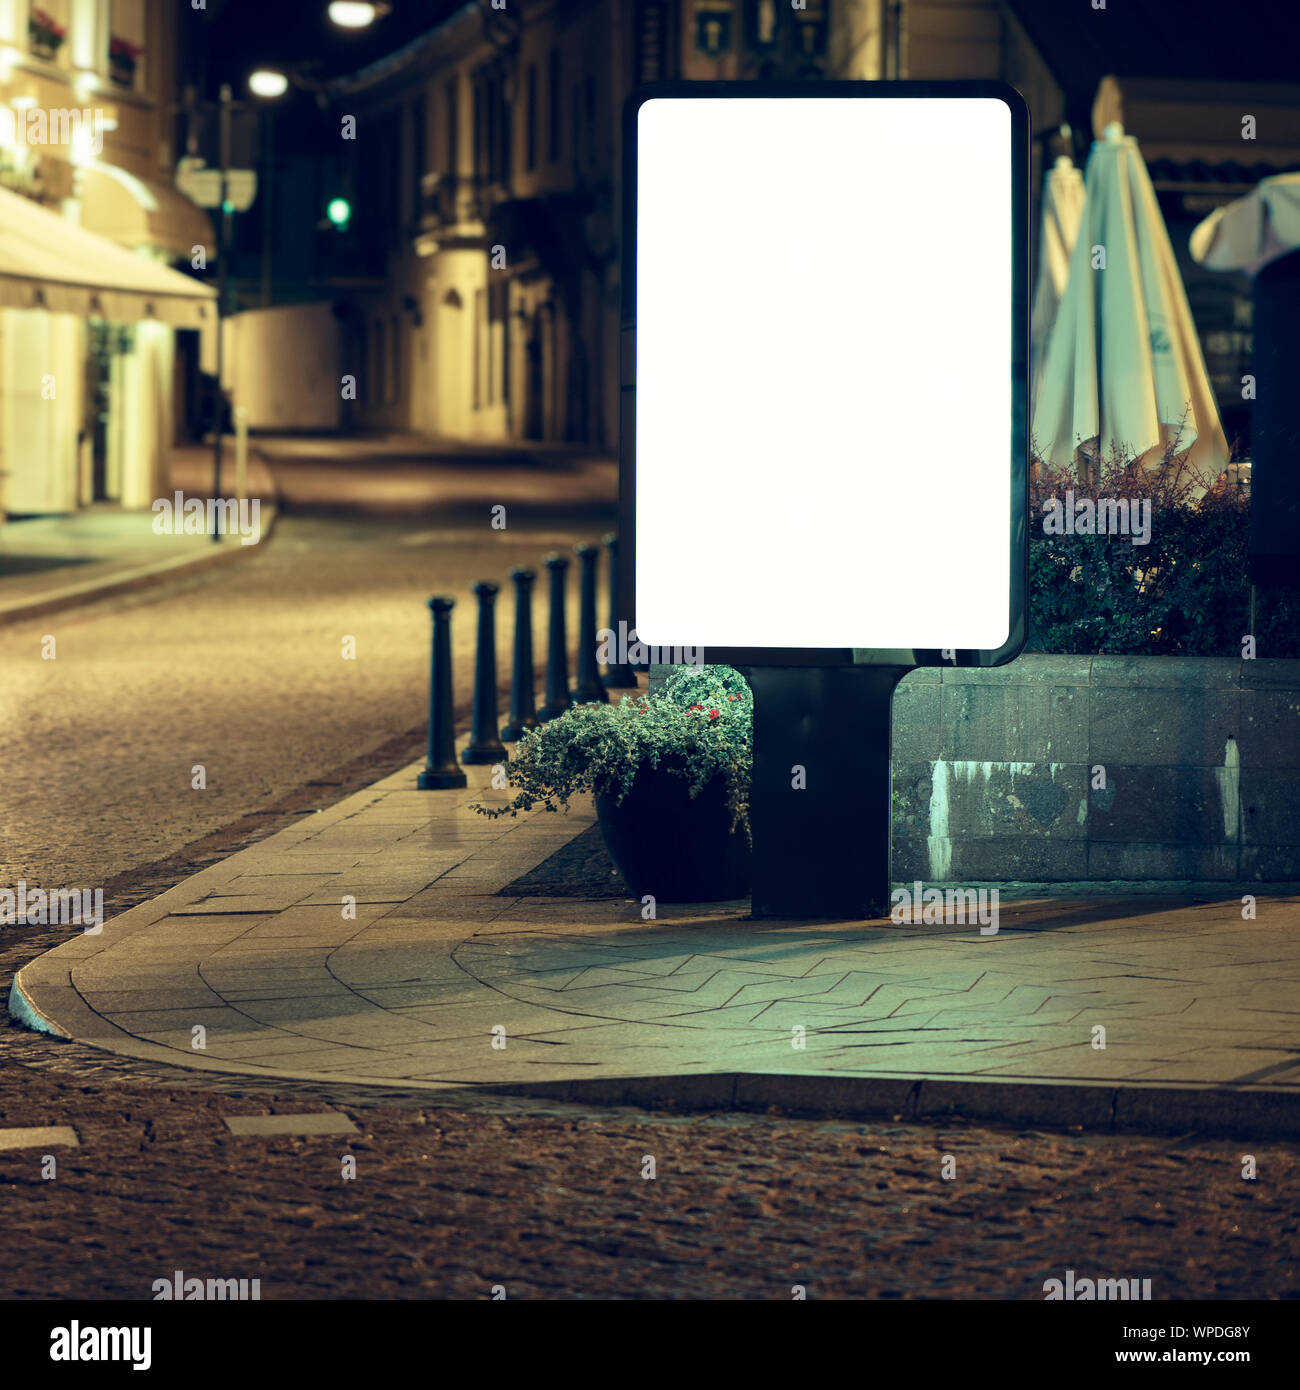 Blank advertising billboard in old town at night. Stock Photo